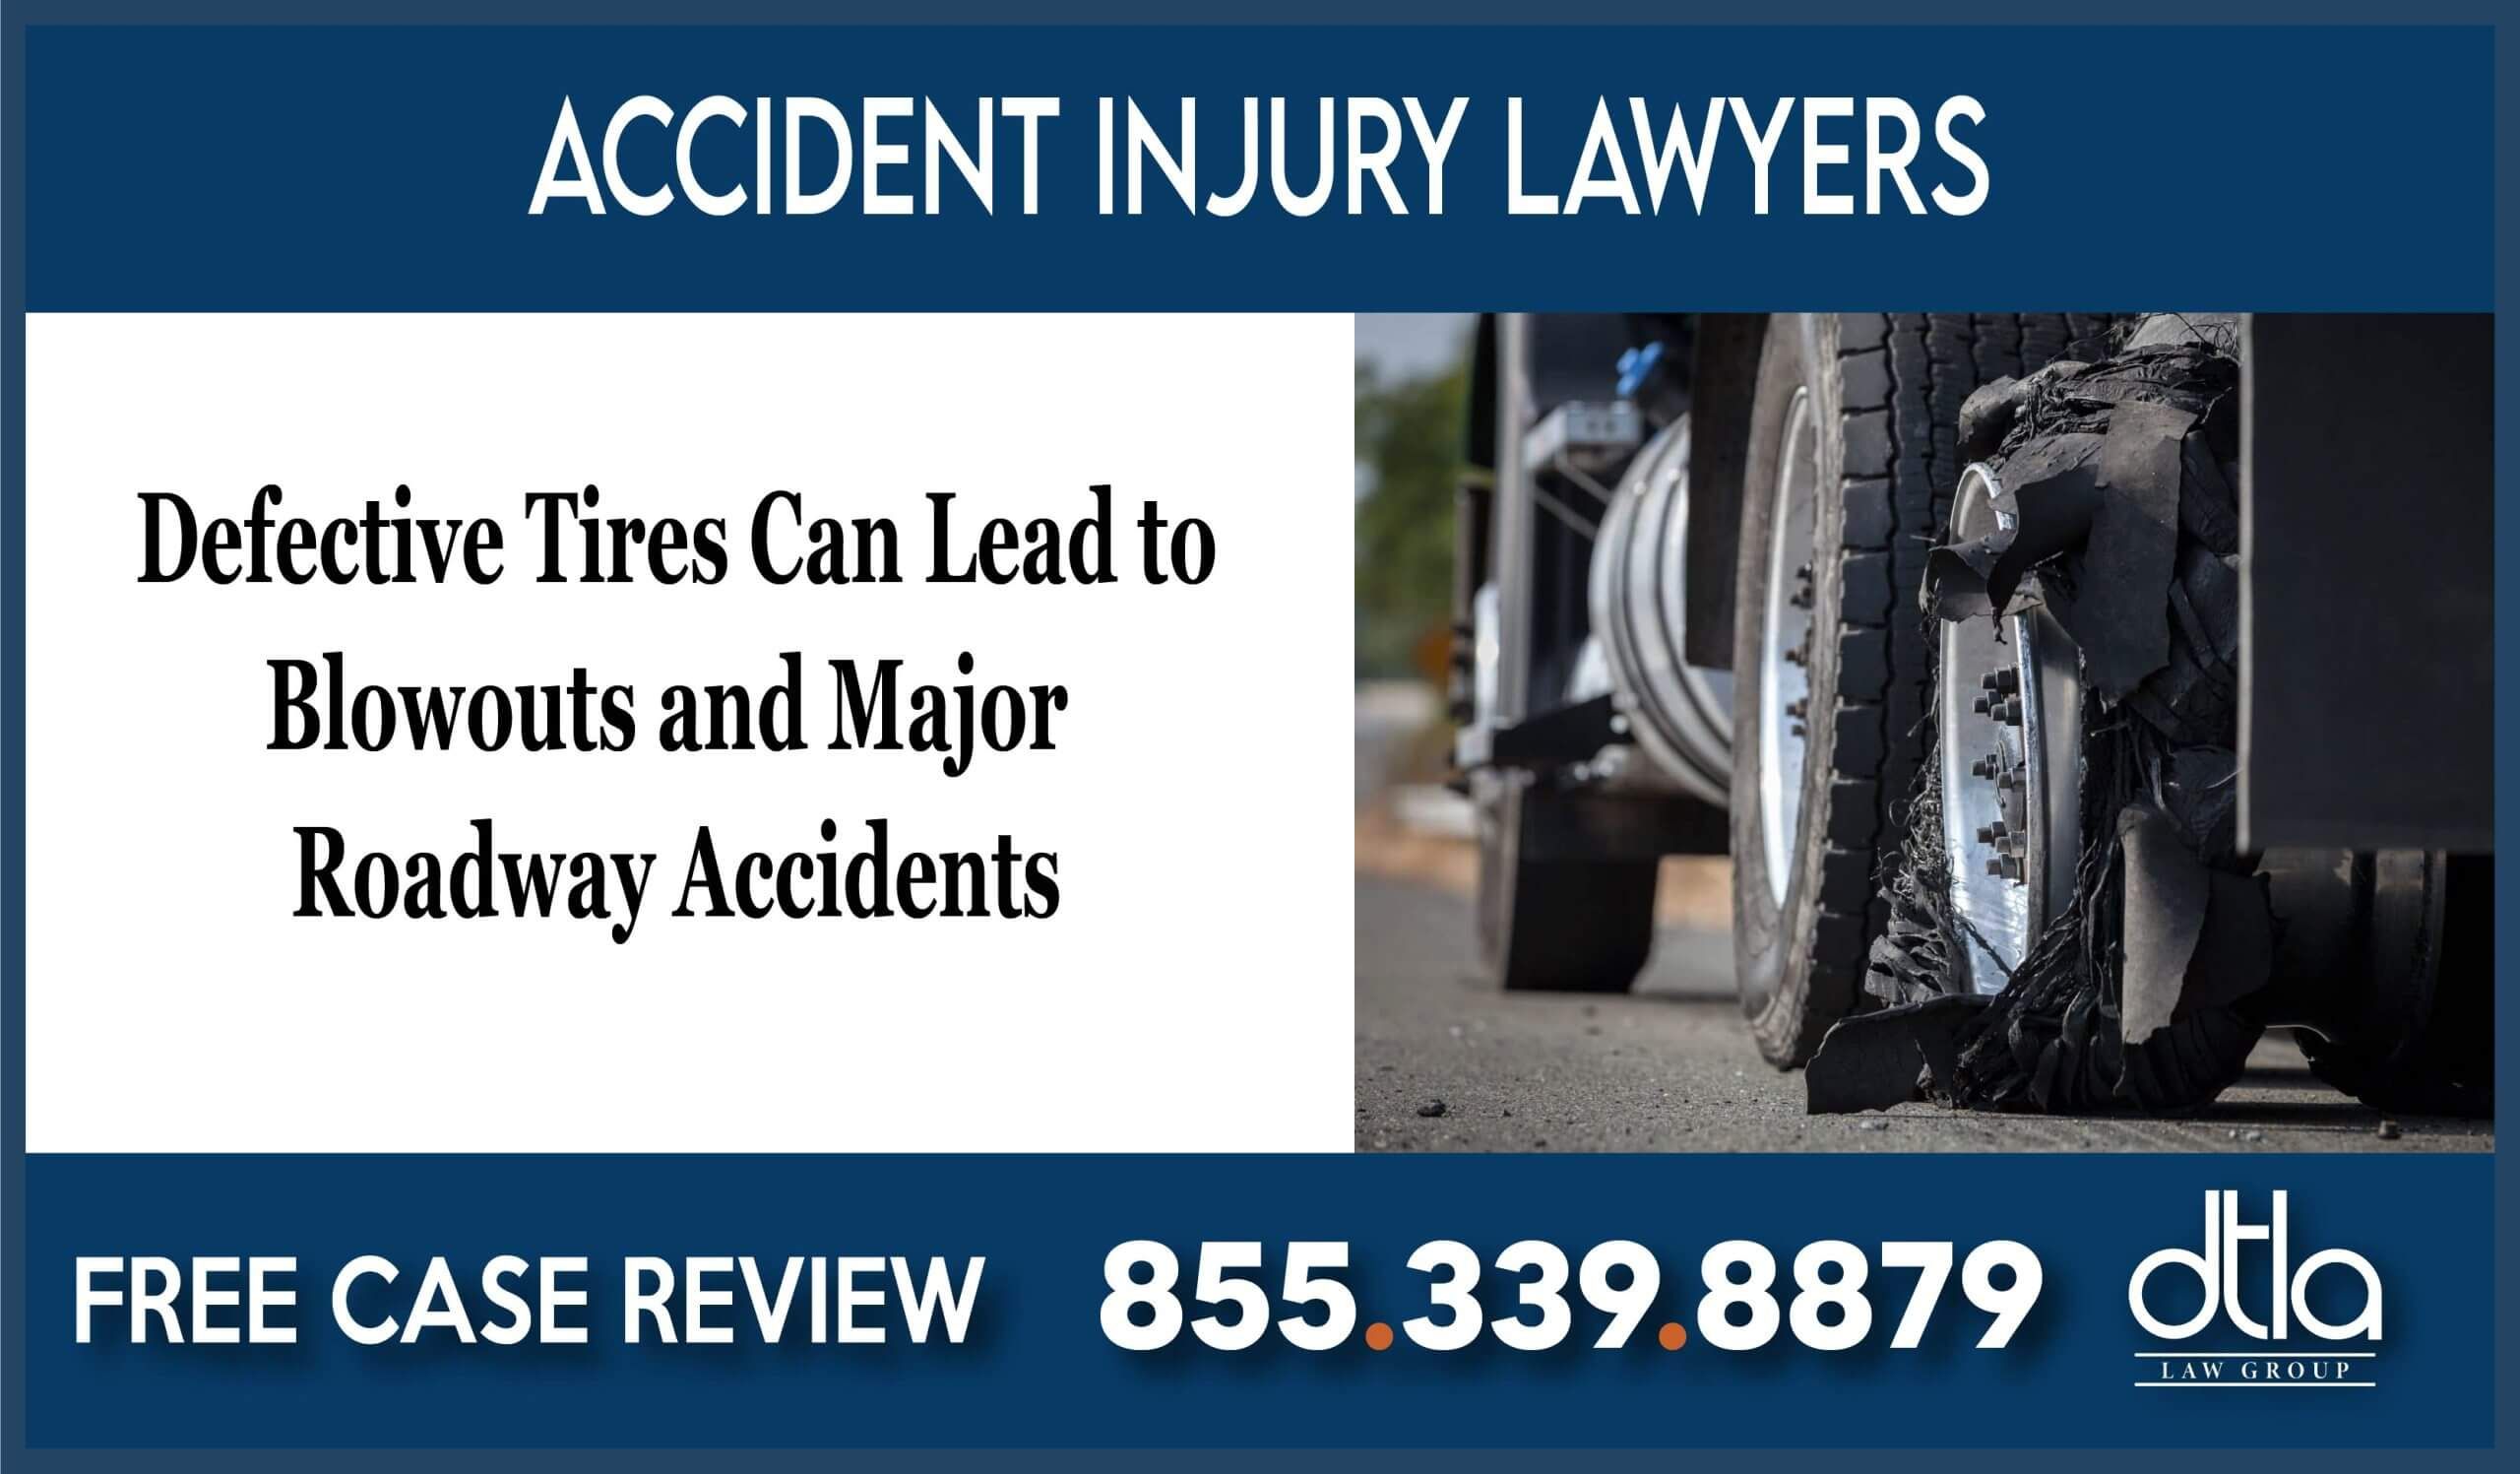 Defective Tires can lead to Blowouts and Major Roadway Accidents lawyer attorney sue compensation lawsuit